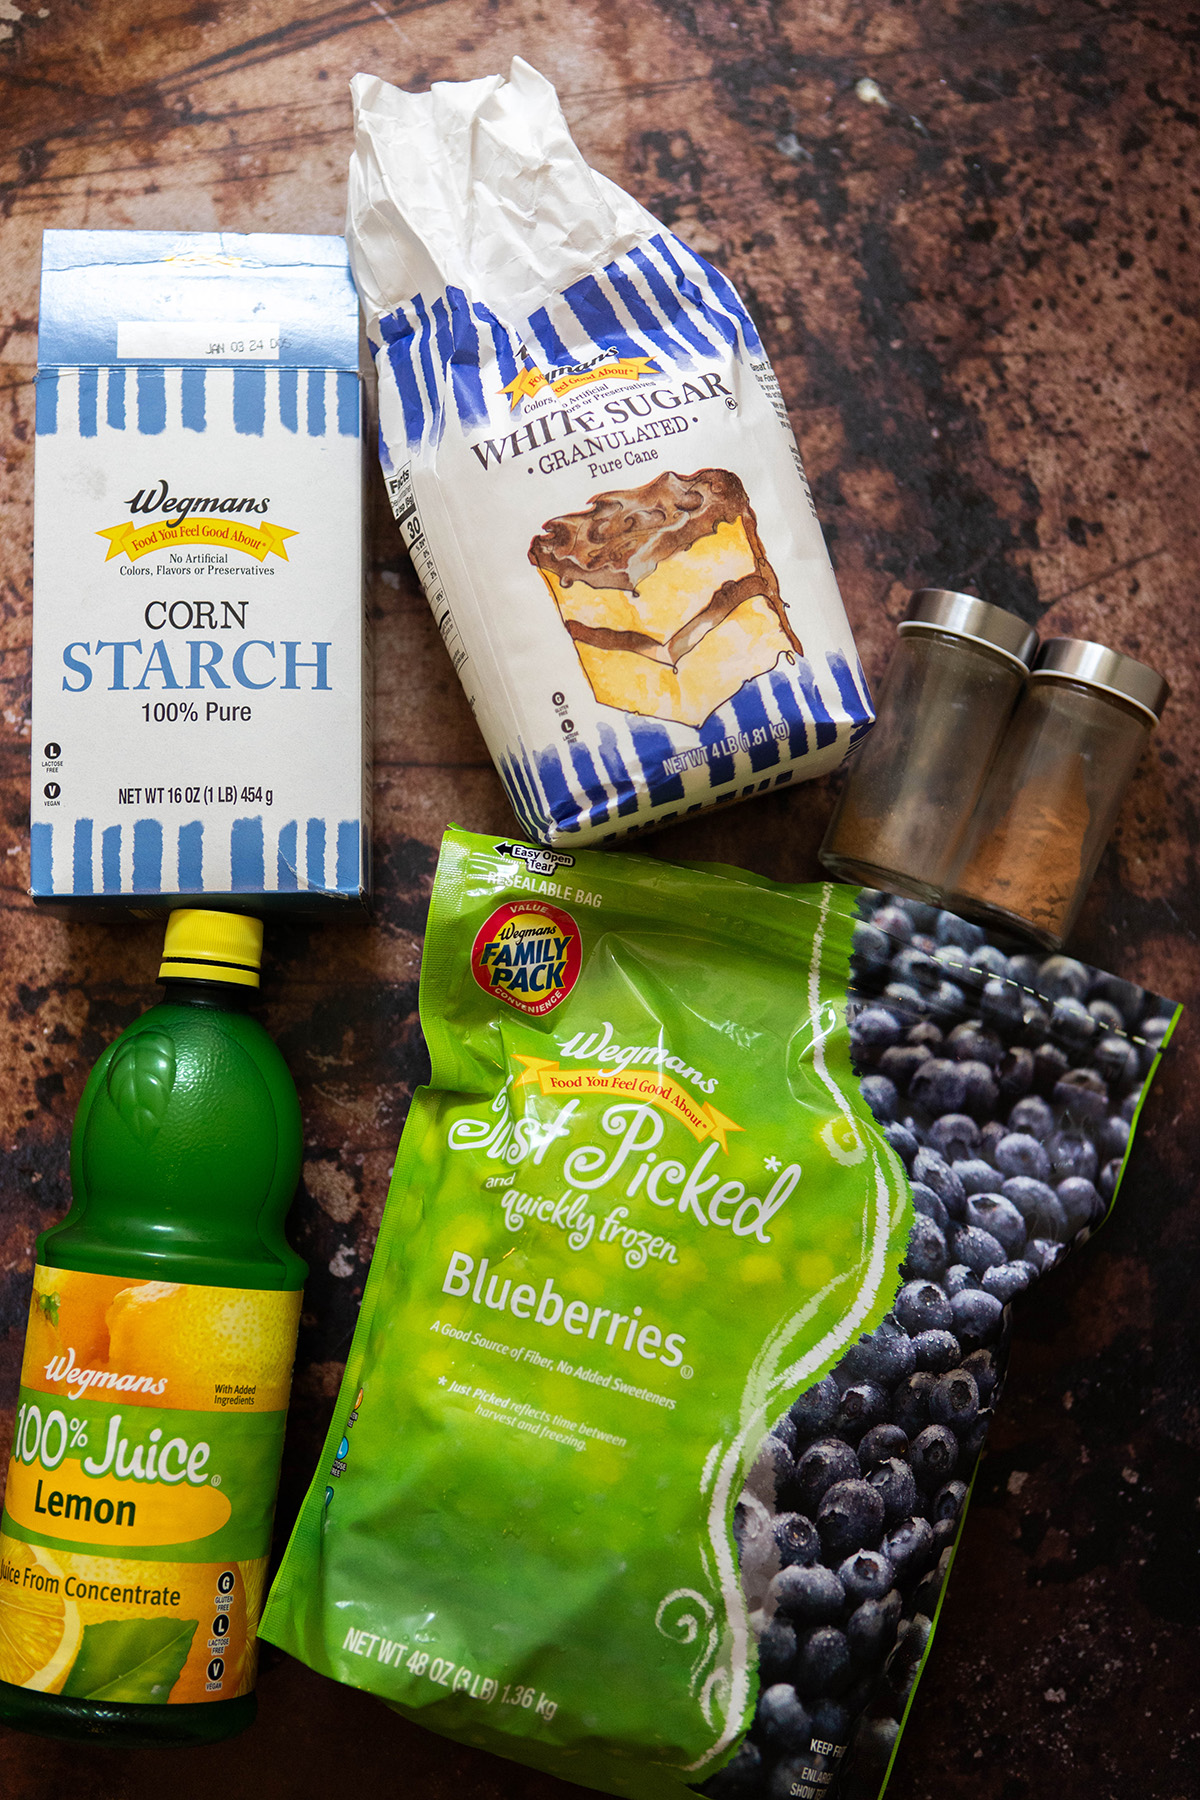 ingredients for Blueberry Pie with Frozen Blueberries: Easy Homemade Pie